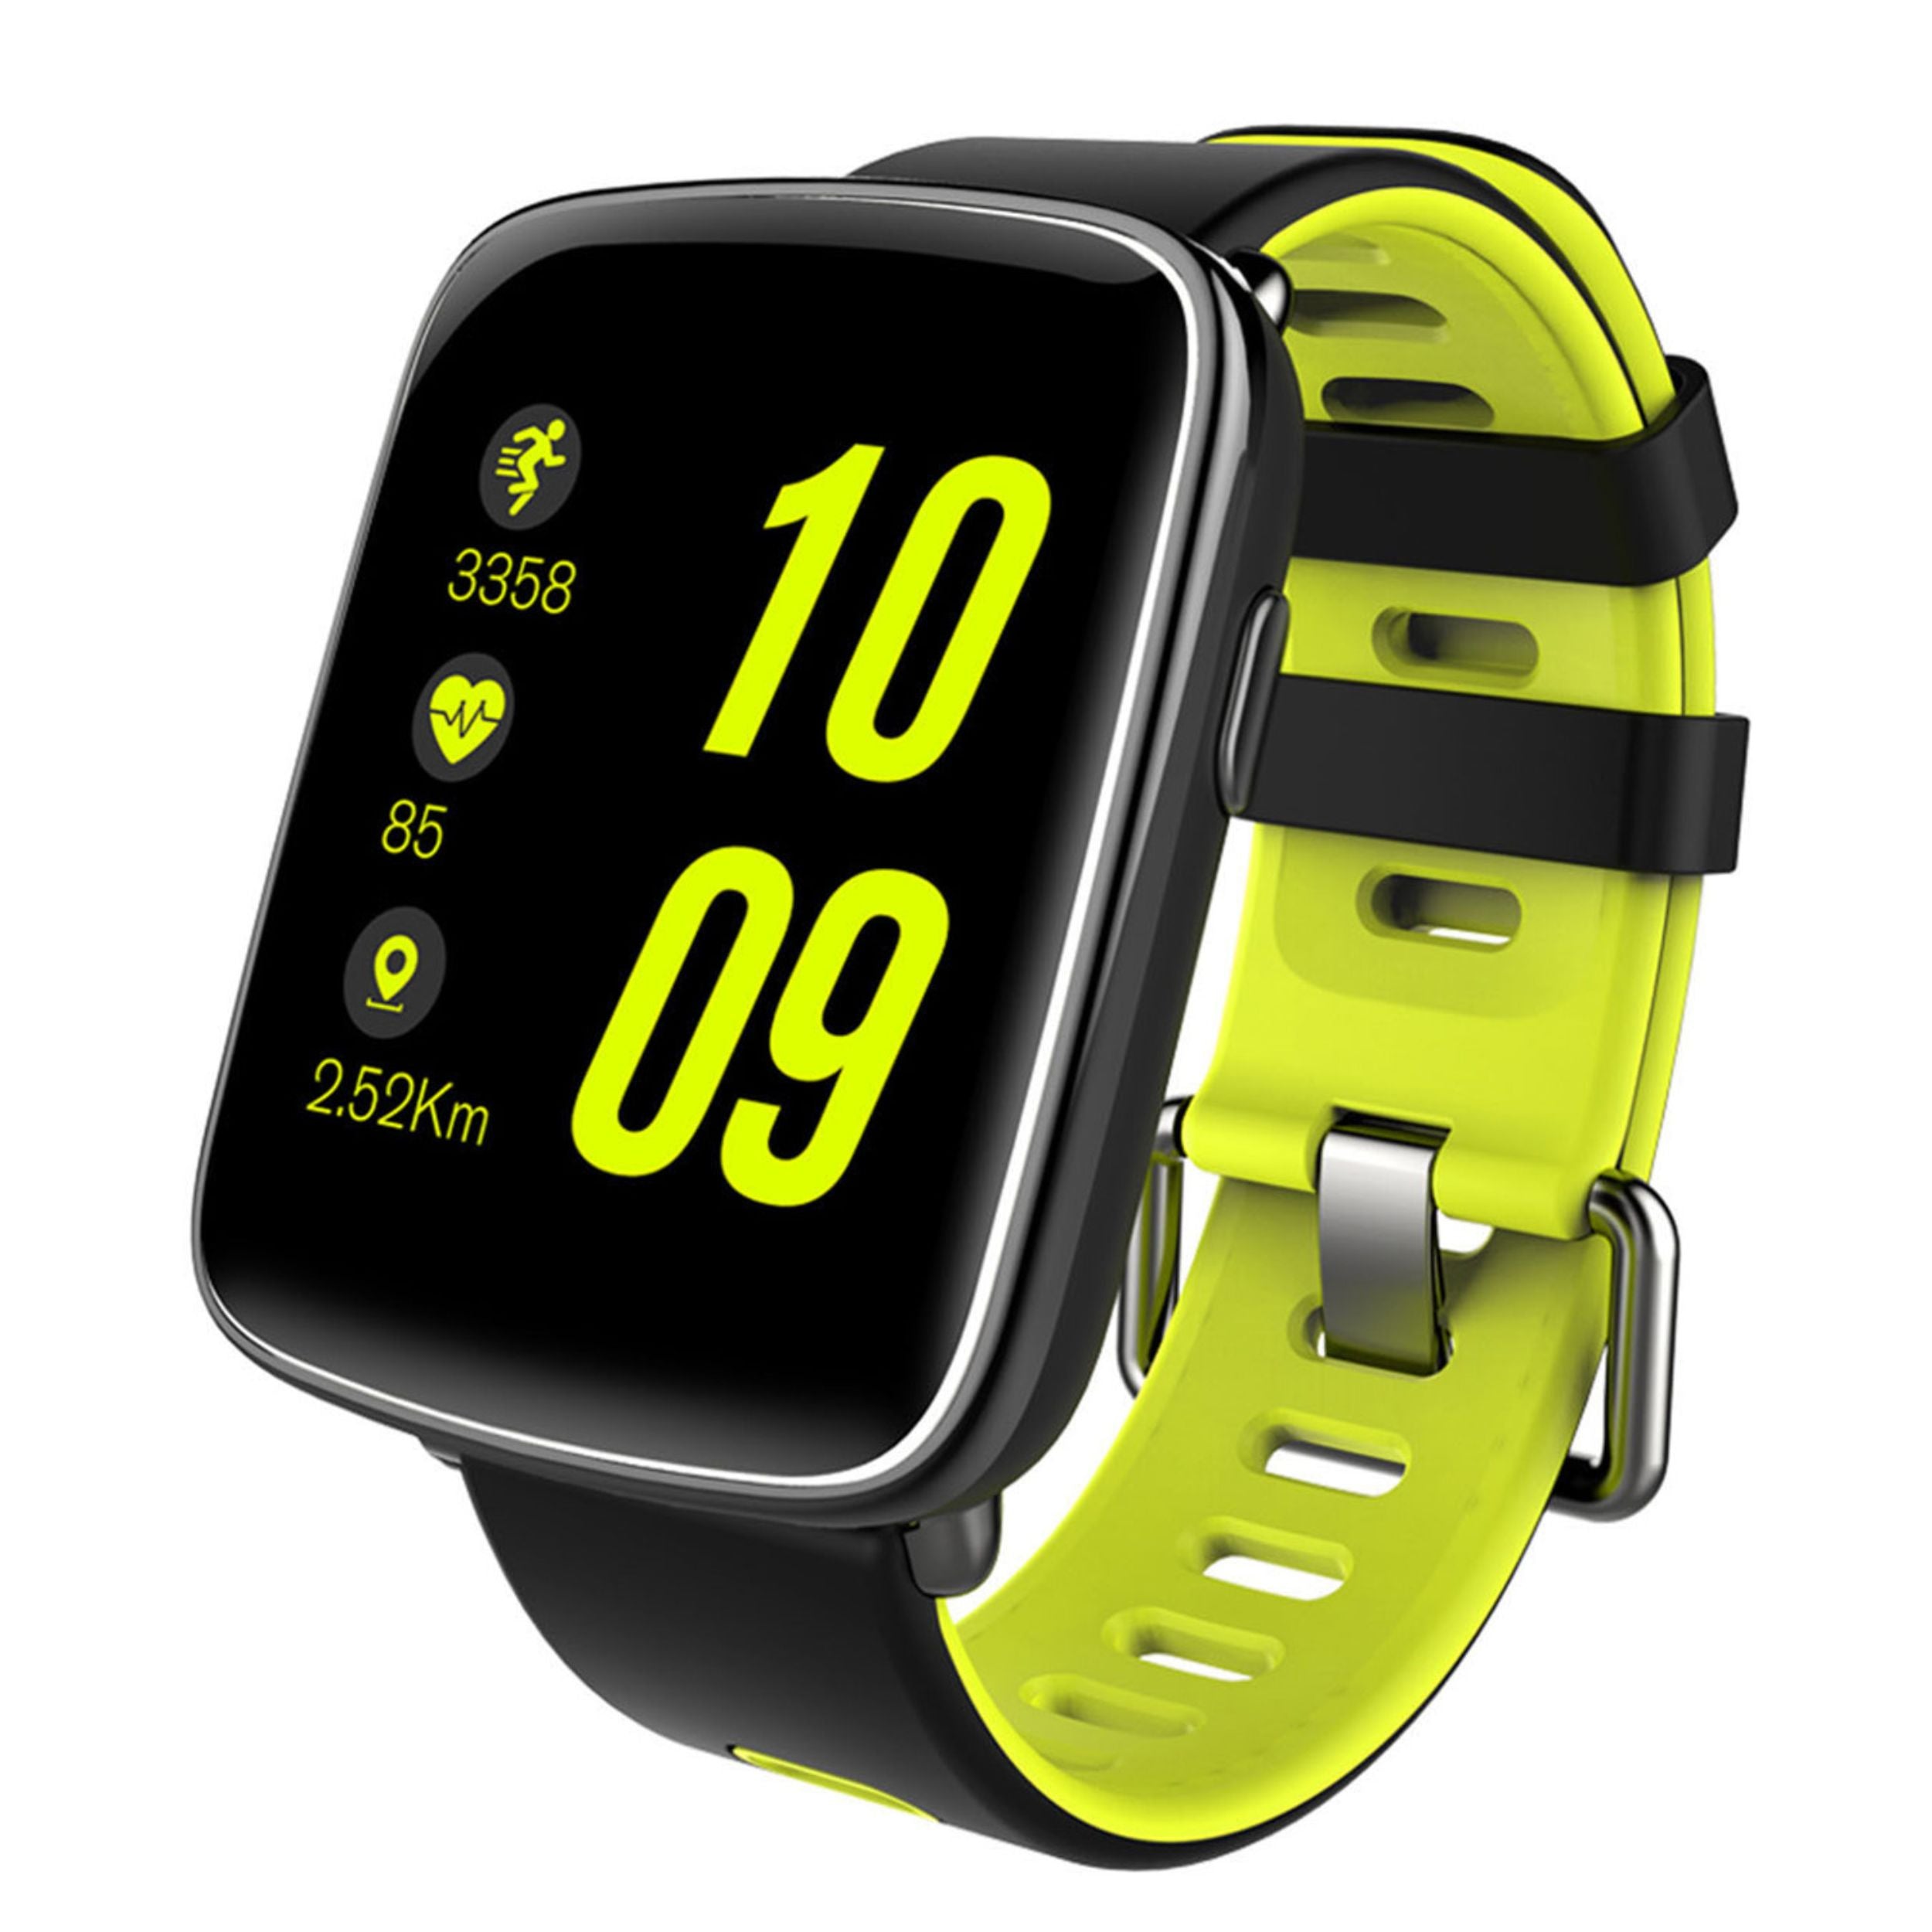 title:1.54'' Color Screen Smart Watch Fitness Tracker - IP68 Waterproof, Heart Rate Monitor, Pedometer, Sleep Monitor;color:Green